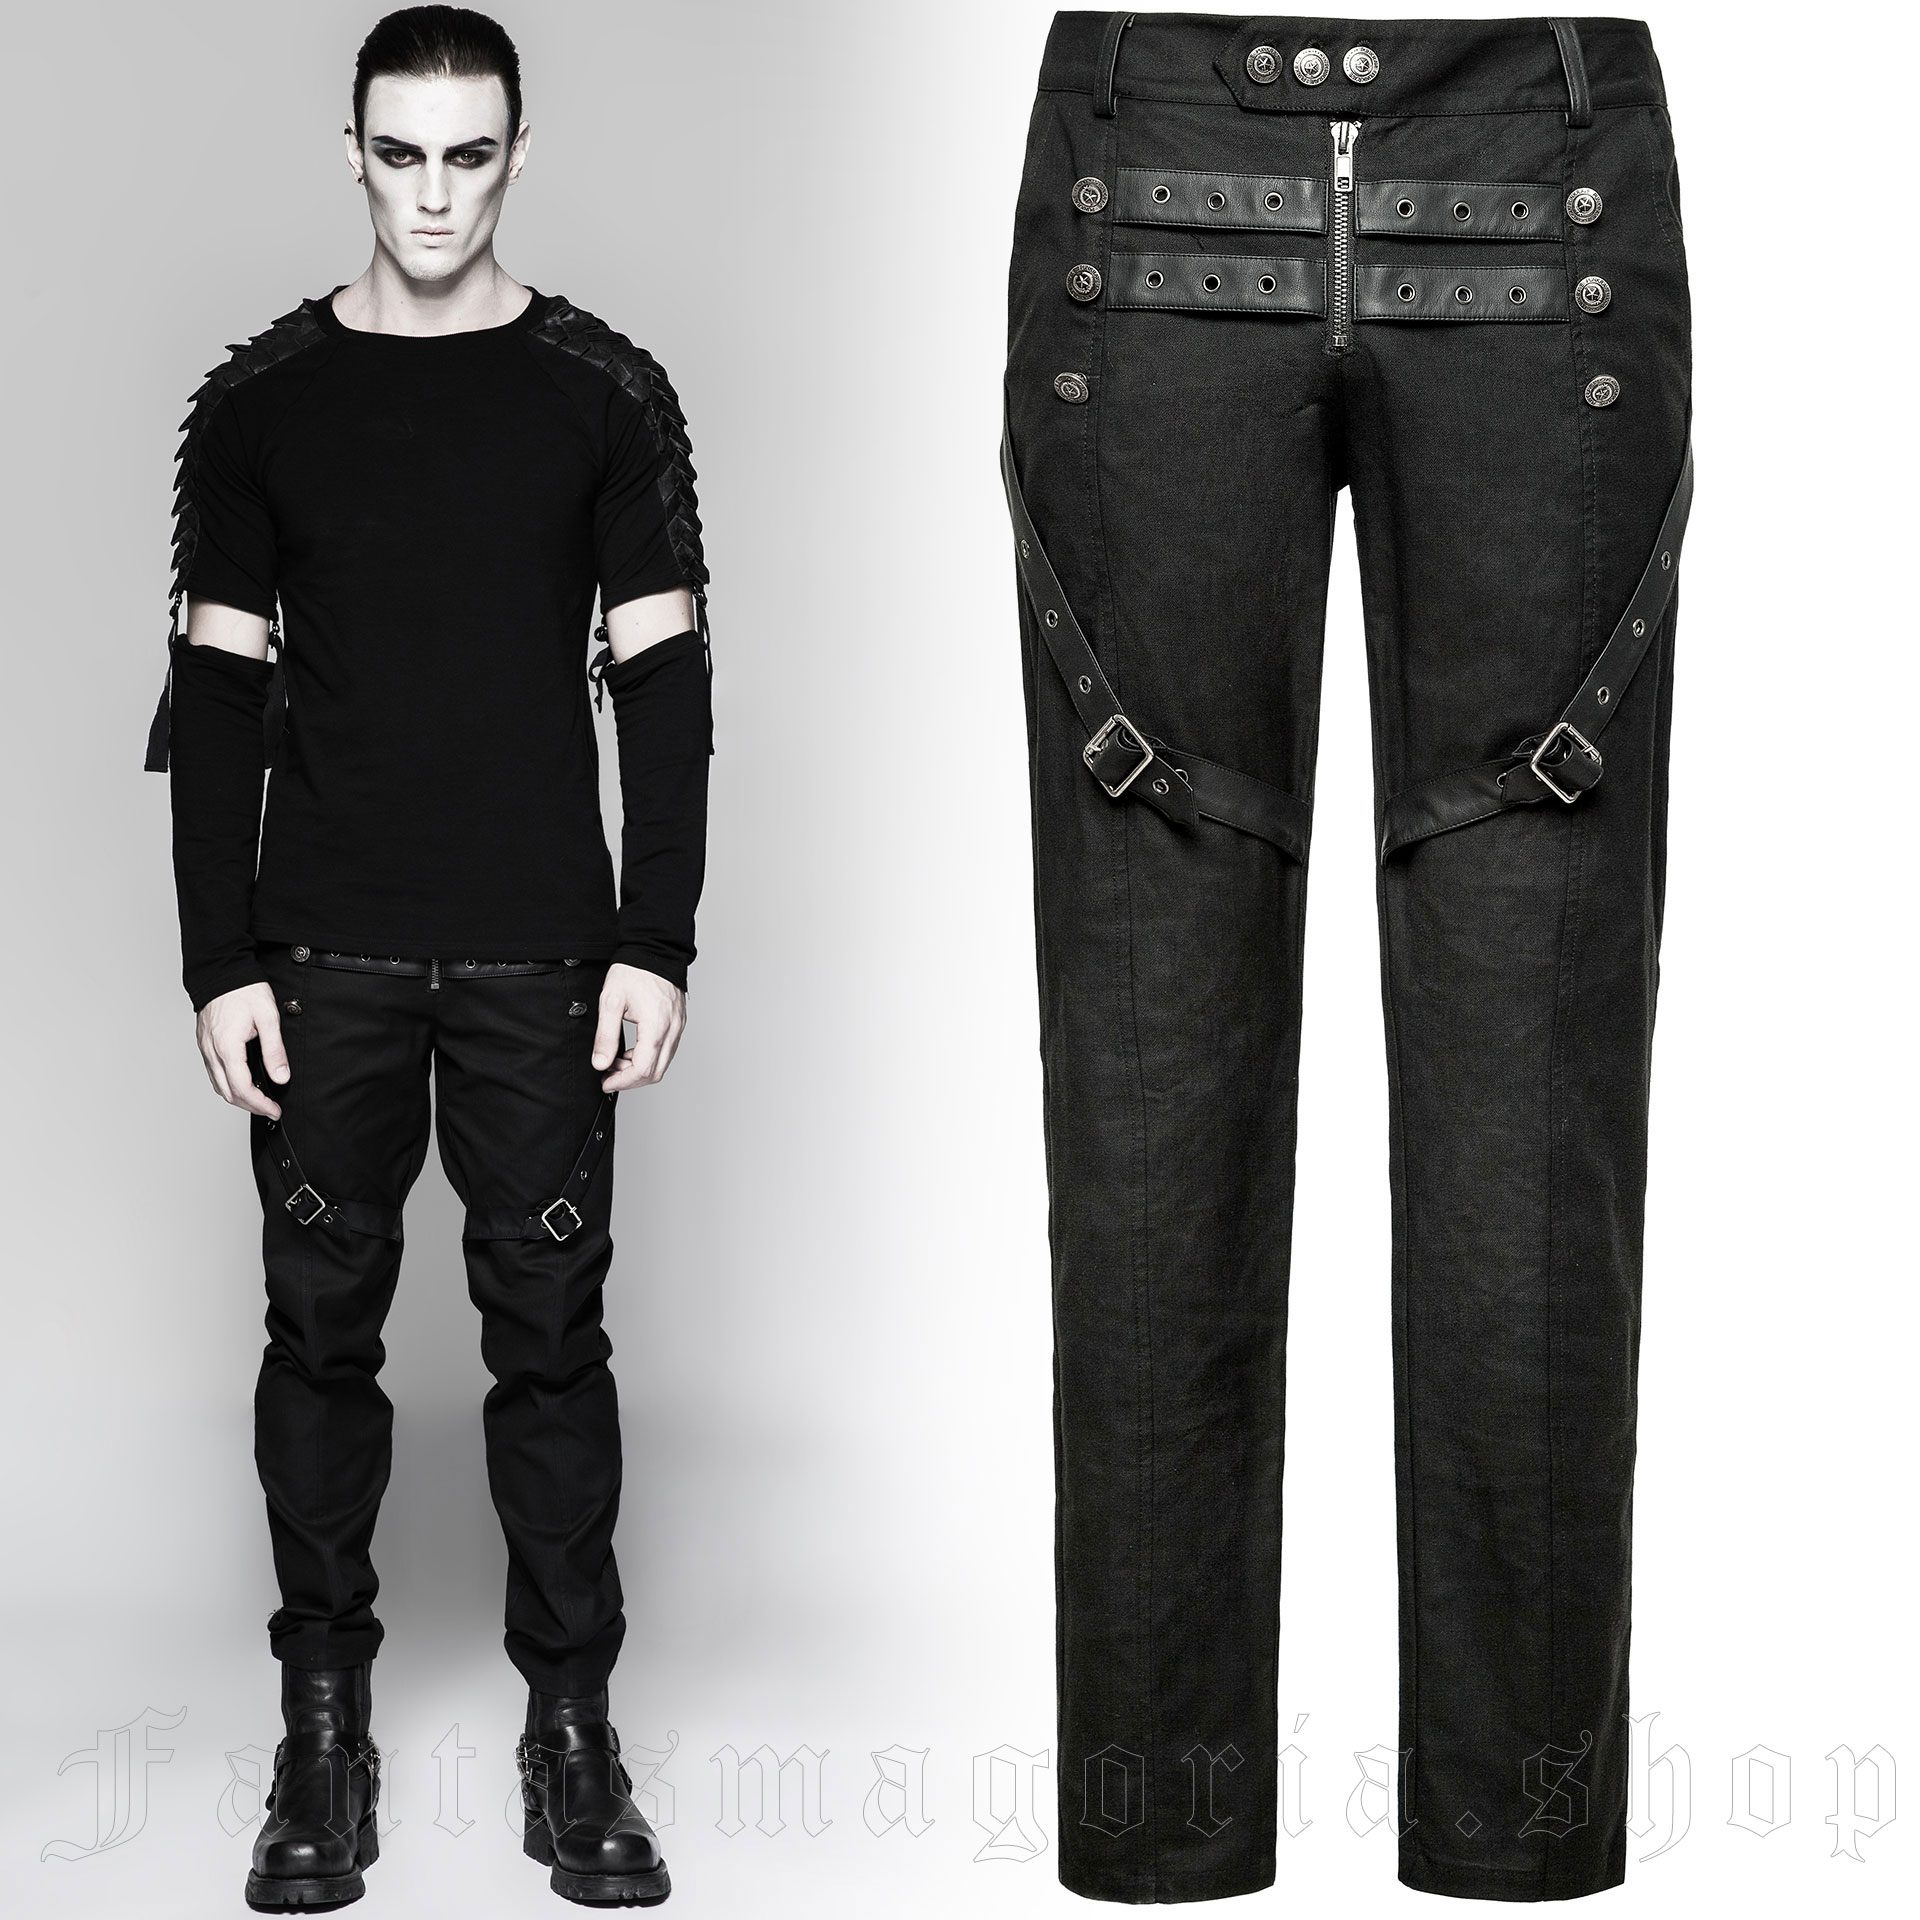 Aries Trousers - Punk Rave - K-279 1